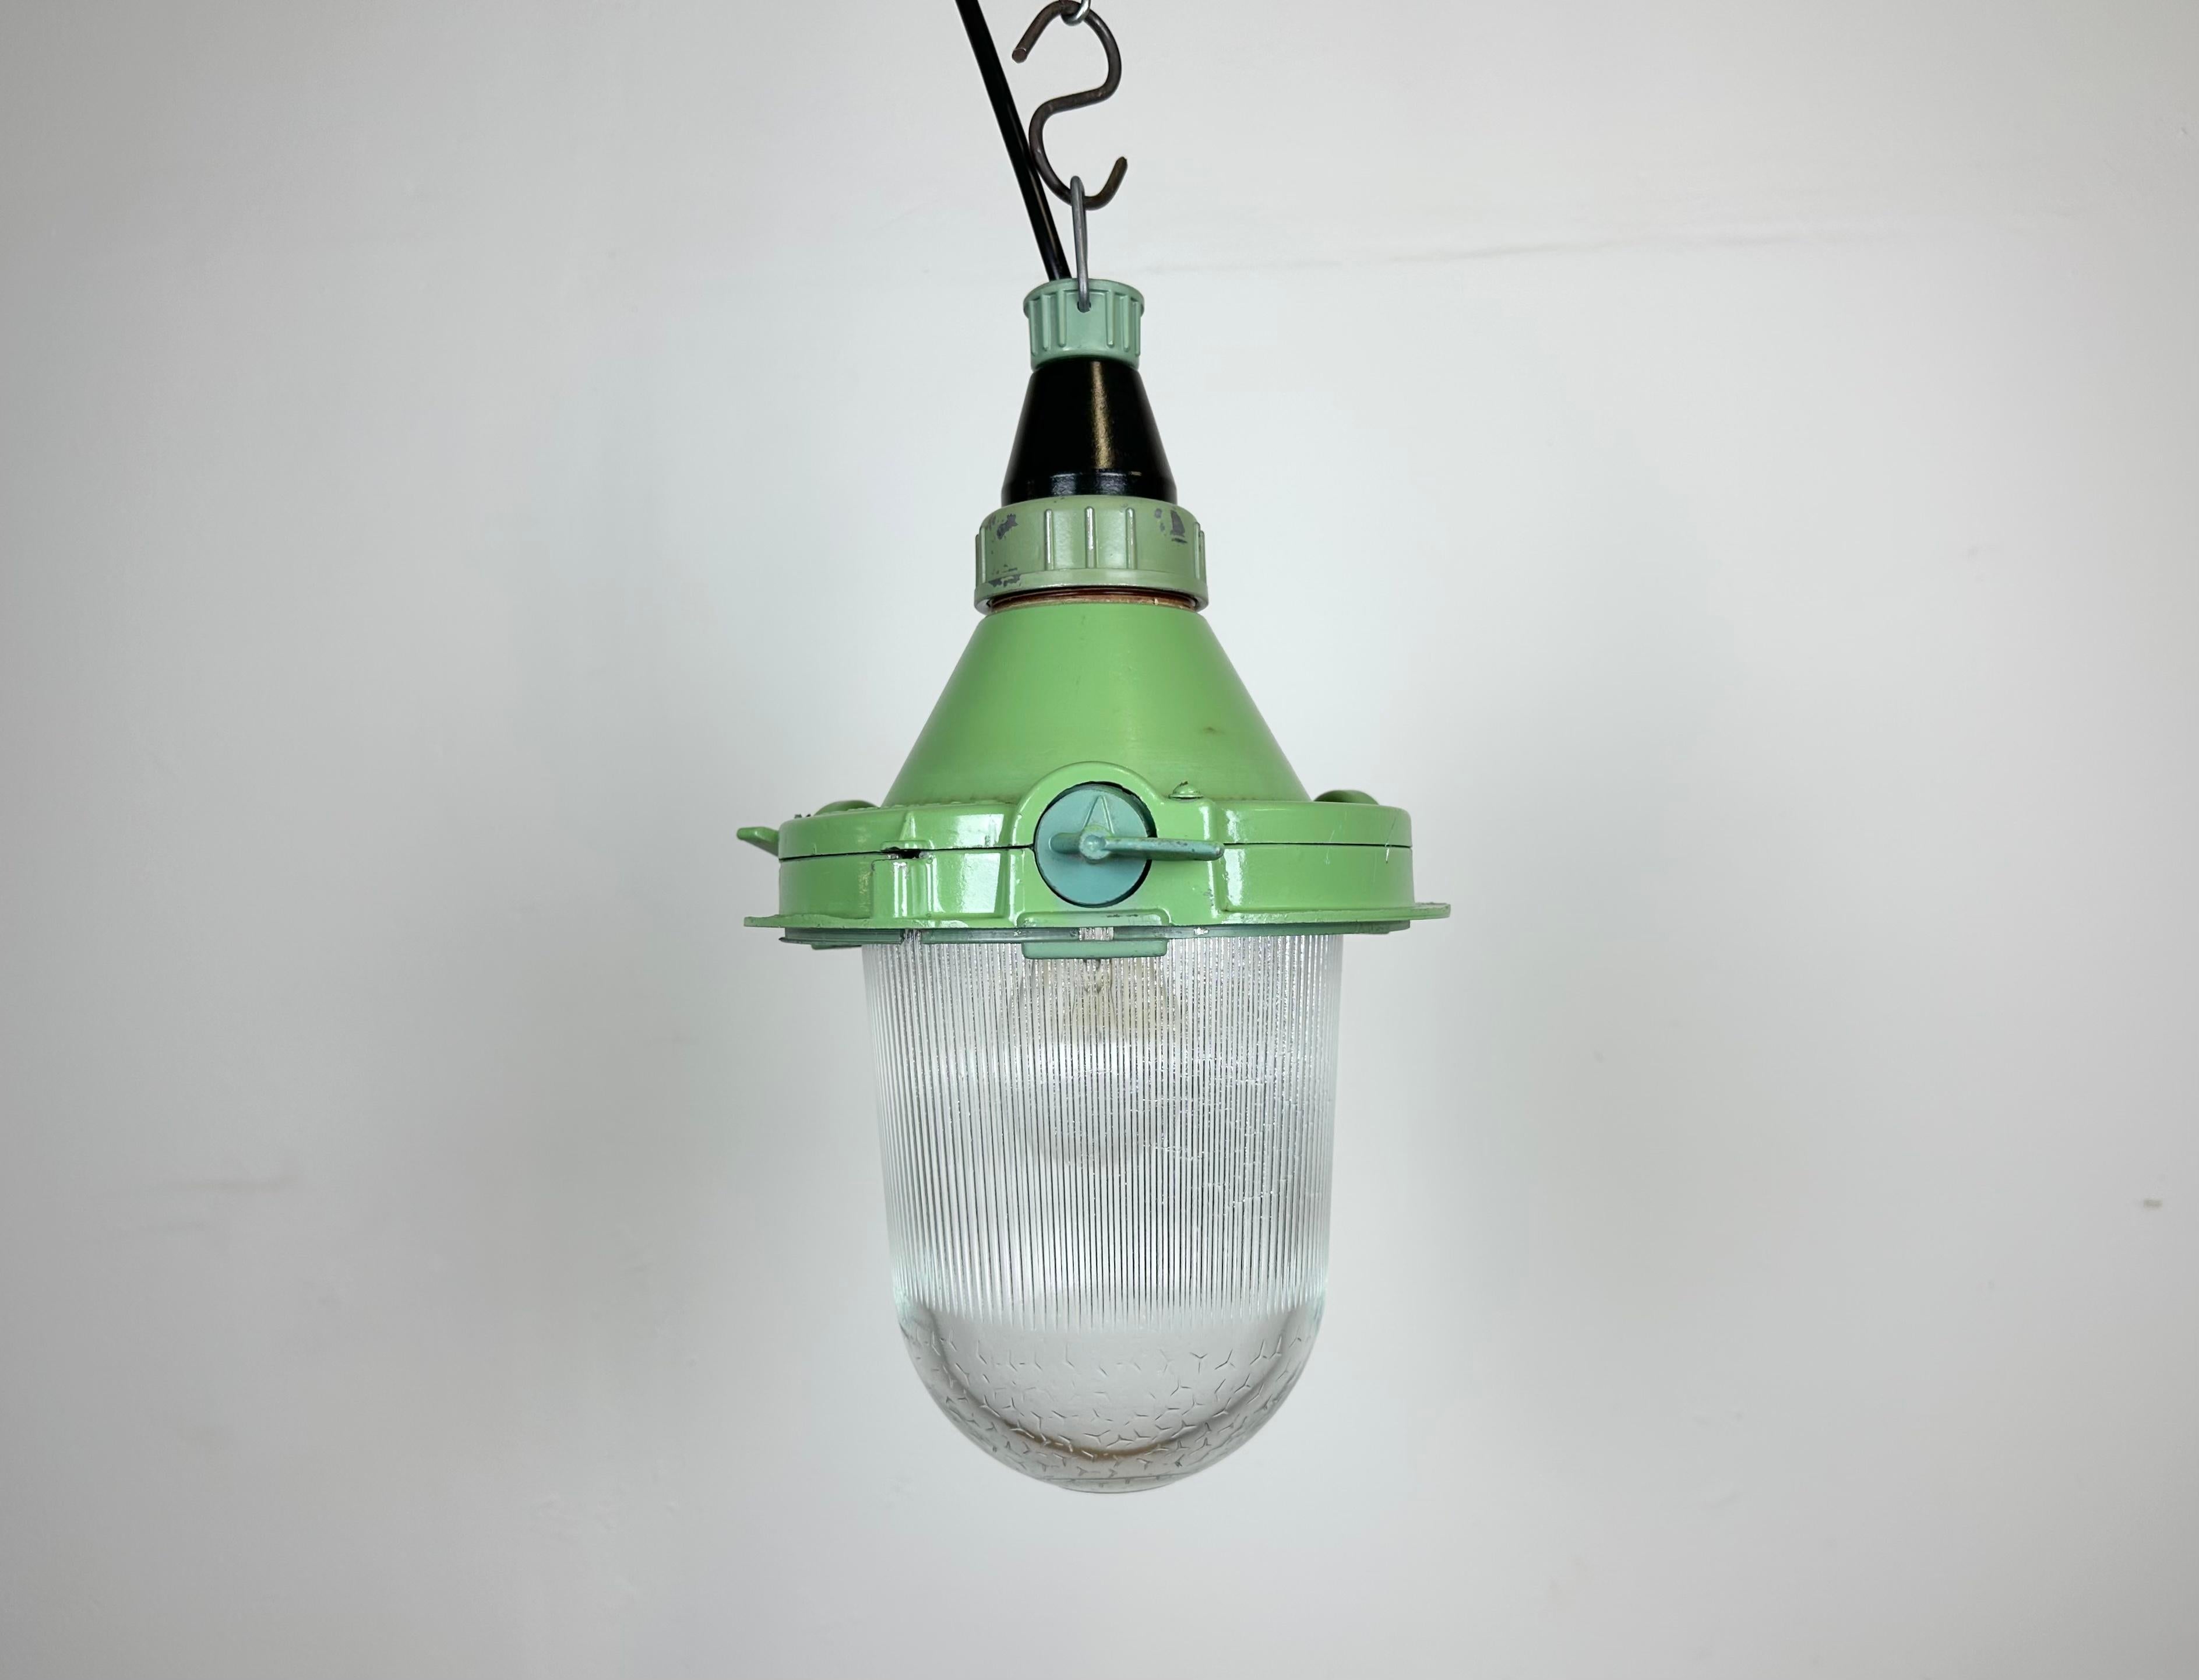 Green industrial light with massive protective glass bulb. Made in former Soviet Union during the 1960s. It features cast aluminium body with bakelite top and a glass cover. The socket requires standard E27 / E26 lightbulbs. Newly wired. Weight: 2.3